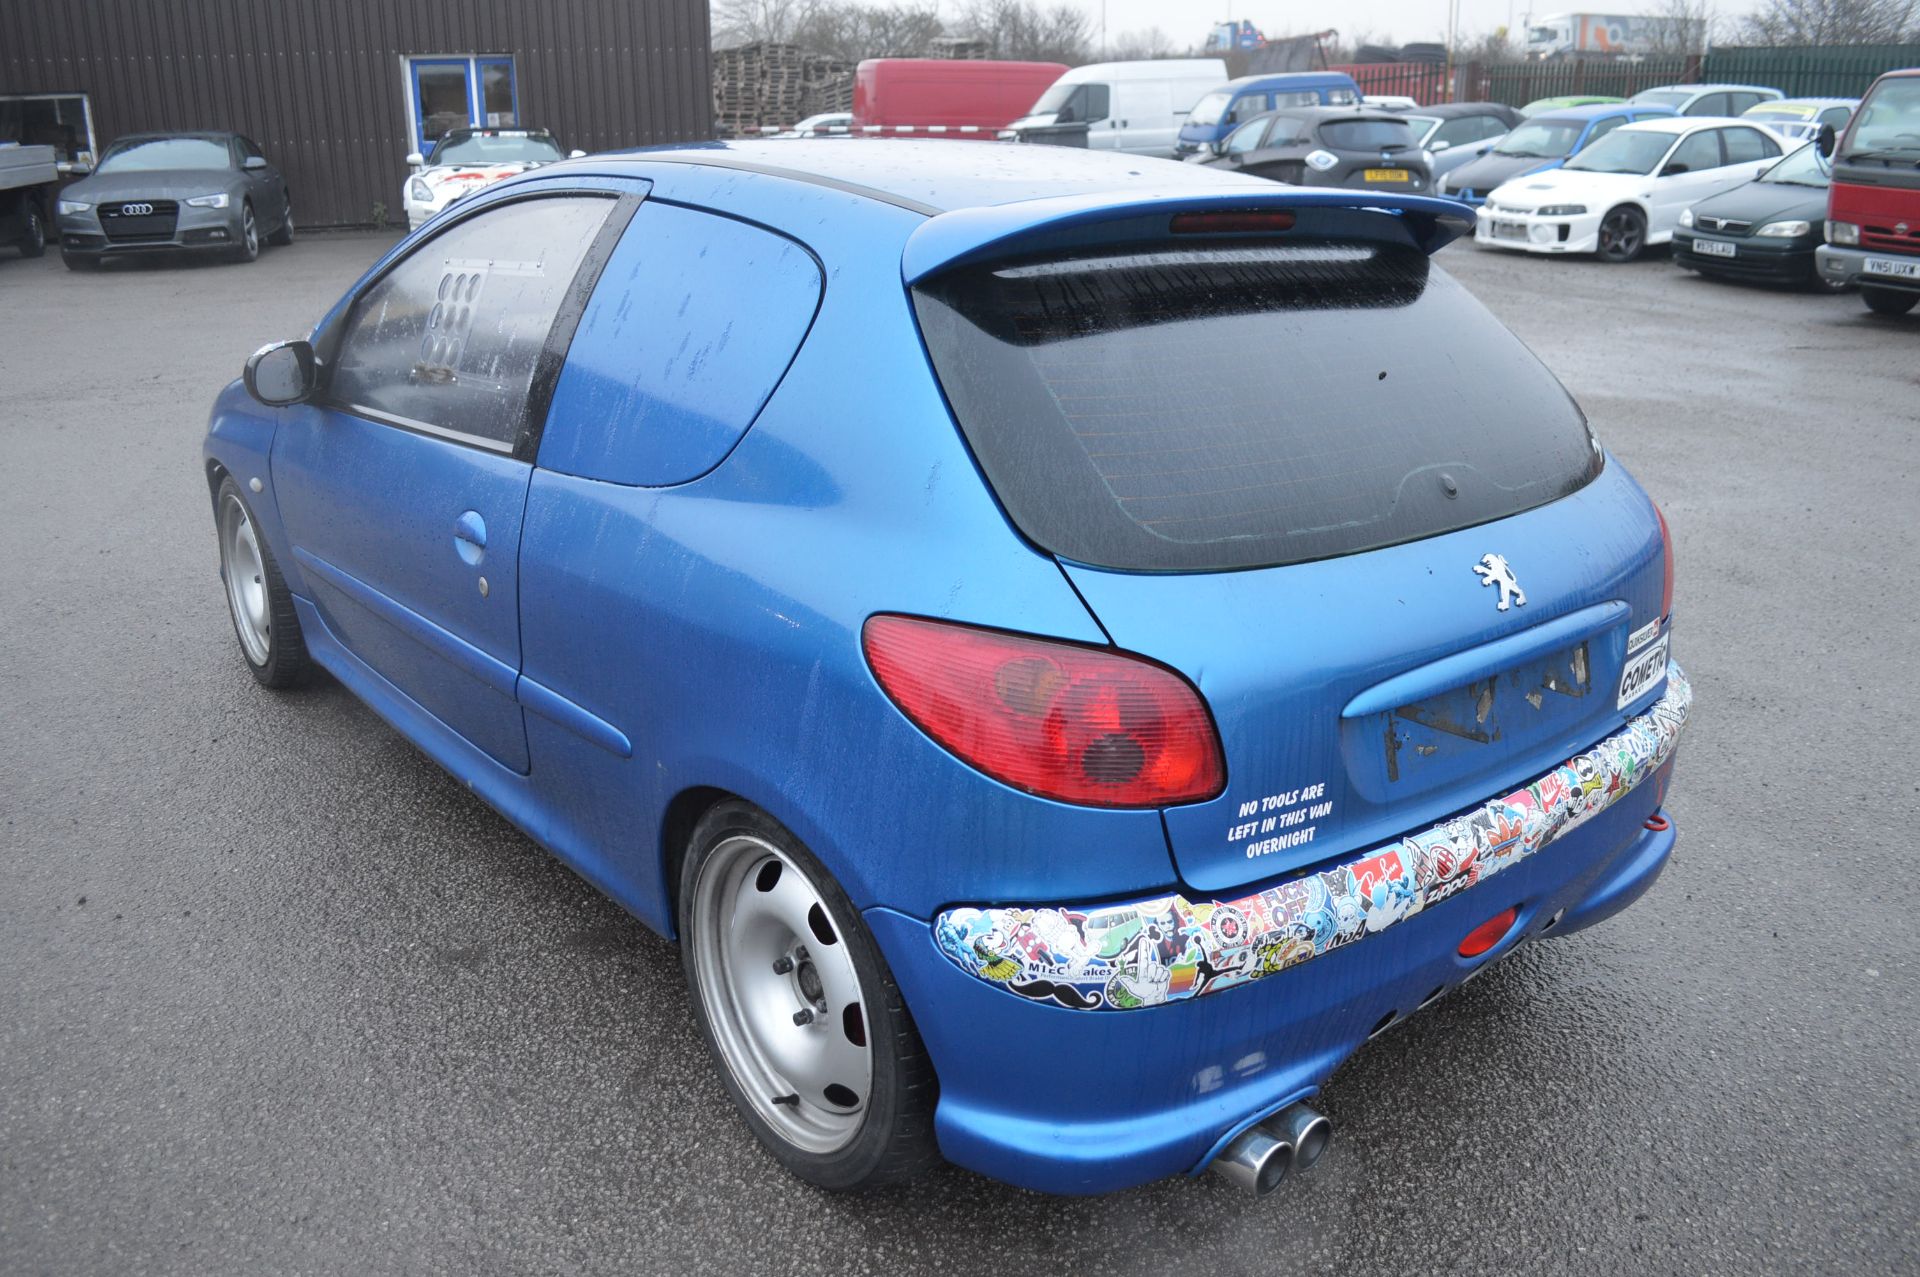 2003/03 REG PEUGEOT 206 GTI 180HP FAST TRACK DAY CAR  HAS THE 'VAN' PANELS FITTED INSTEAD OF REAR - Image 4 of 14